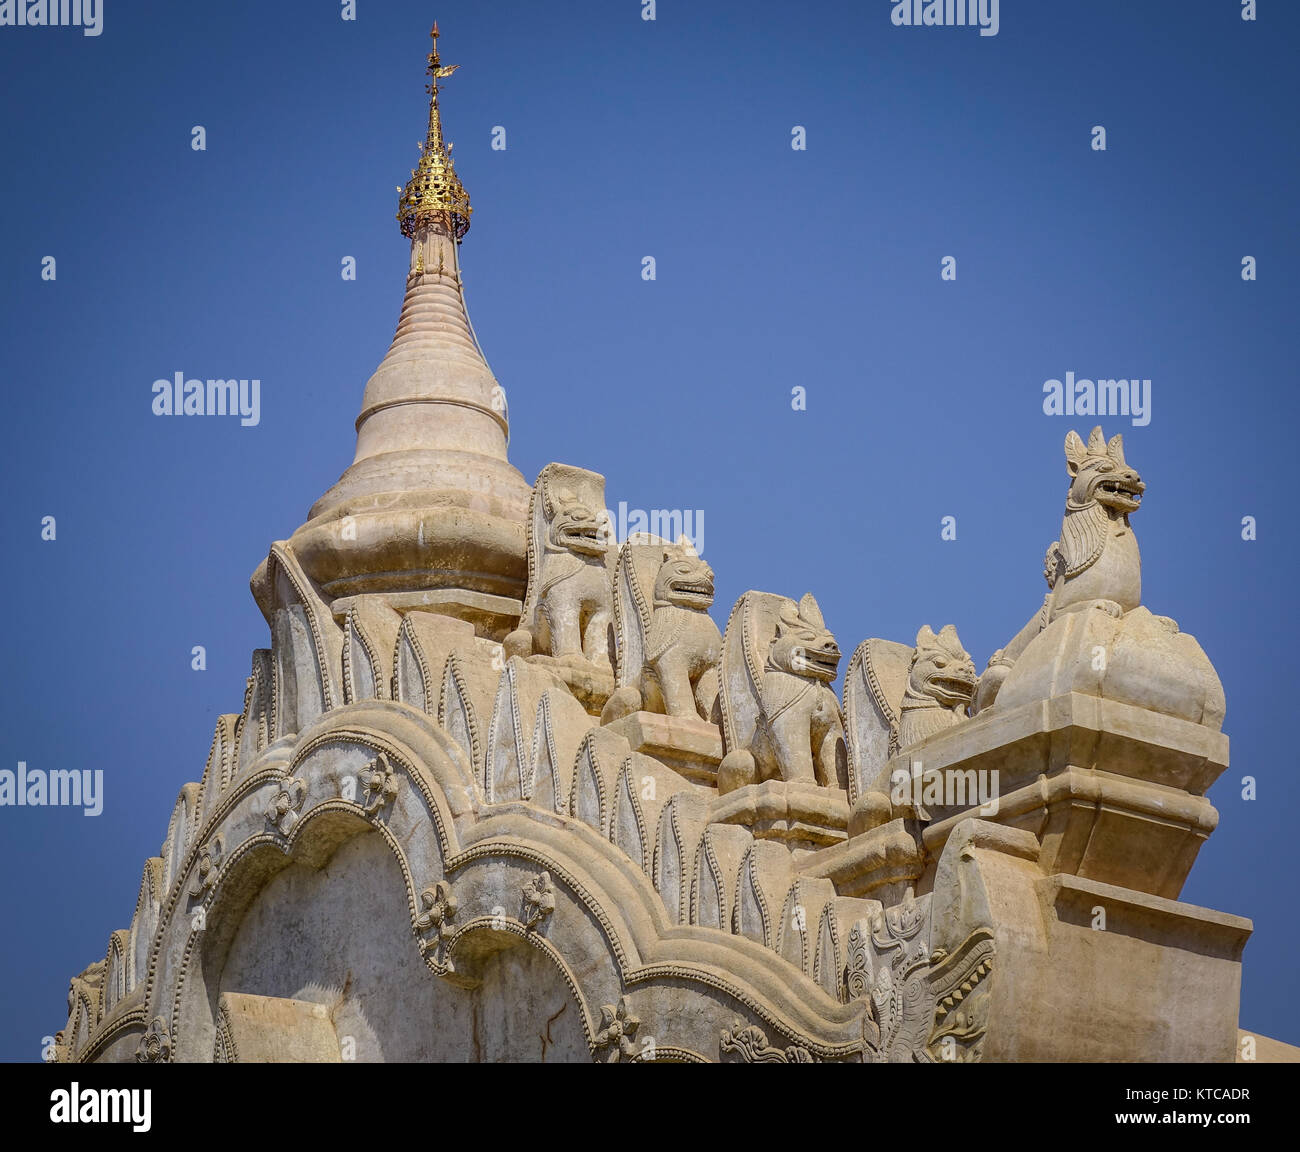 Top of the Ananda Temple at sunny day in Bagan, Myanmar. The Ananda Temple located in Bagan, is a Buddhist temple built in 1105 AD. Stock Photo